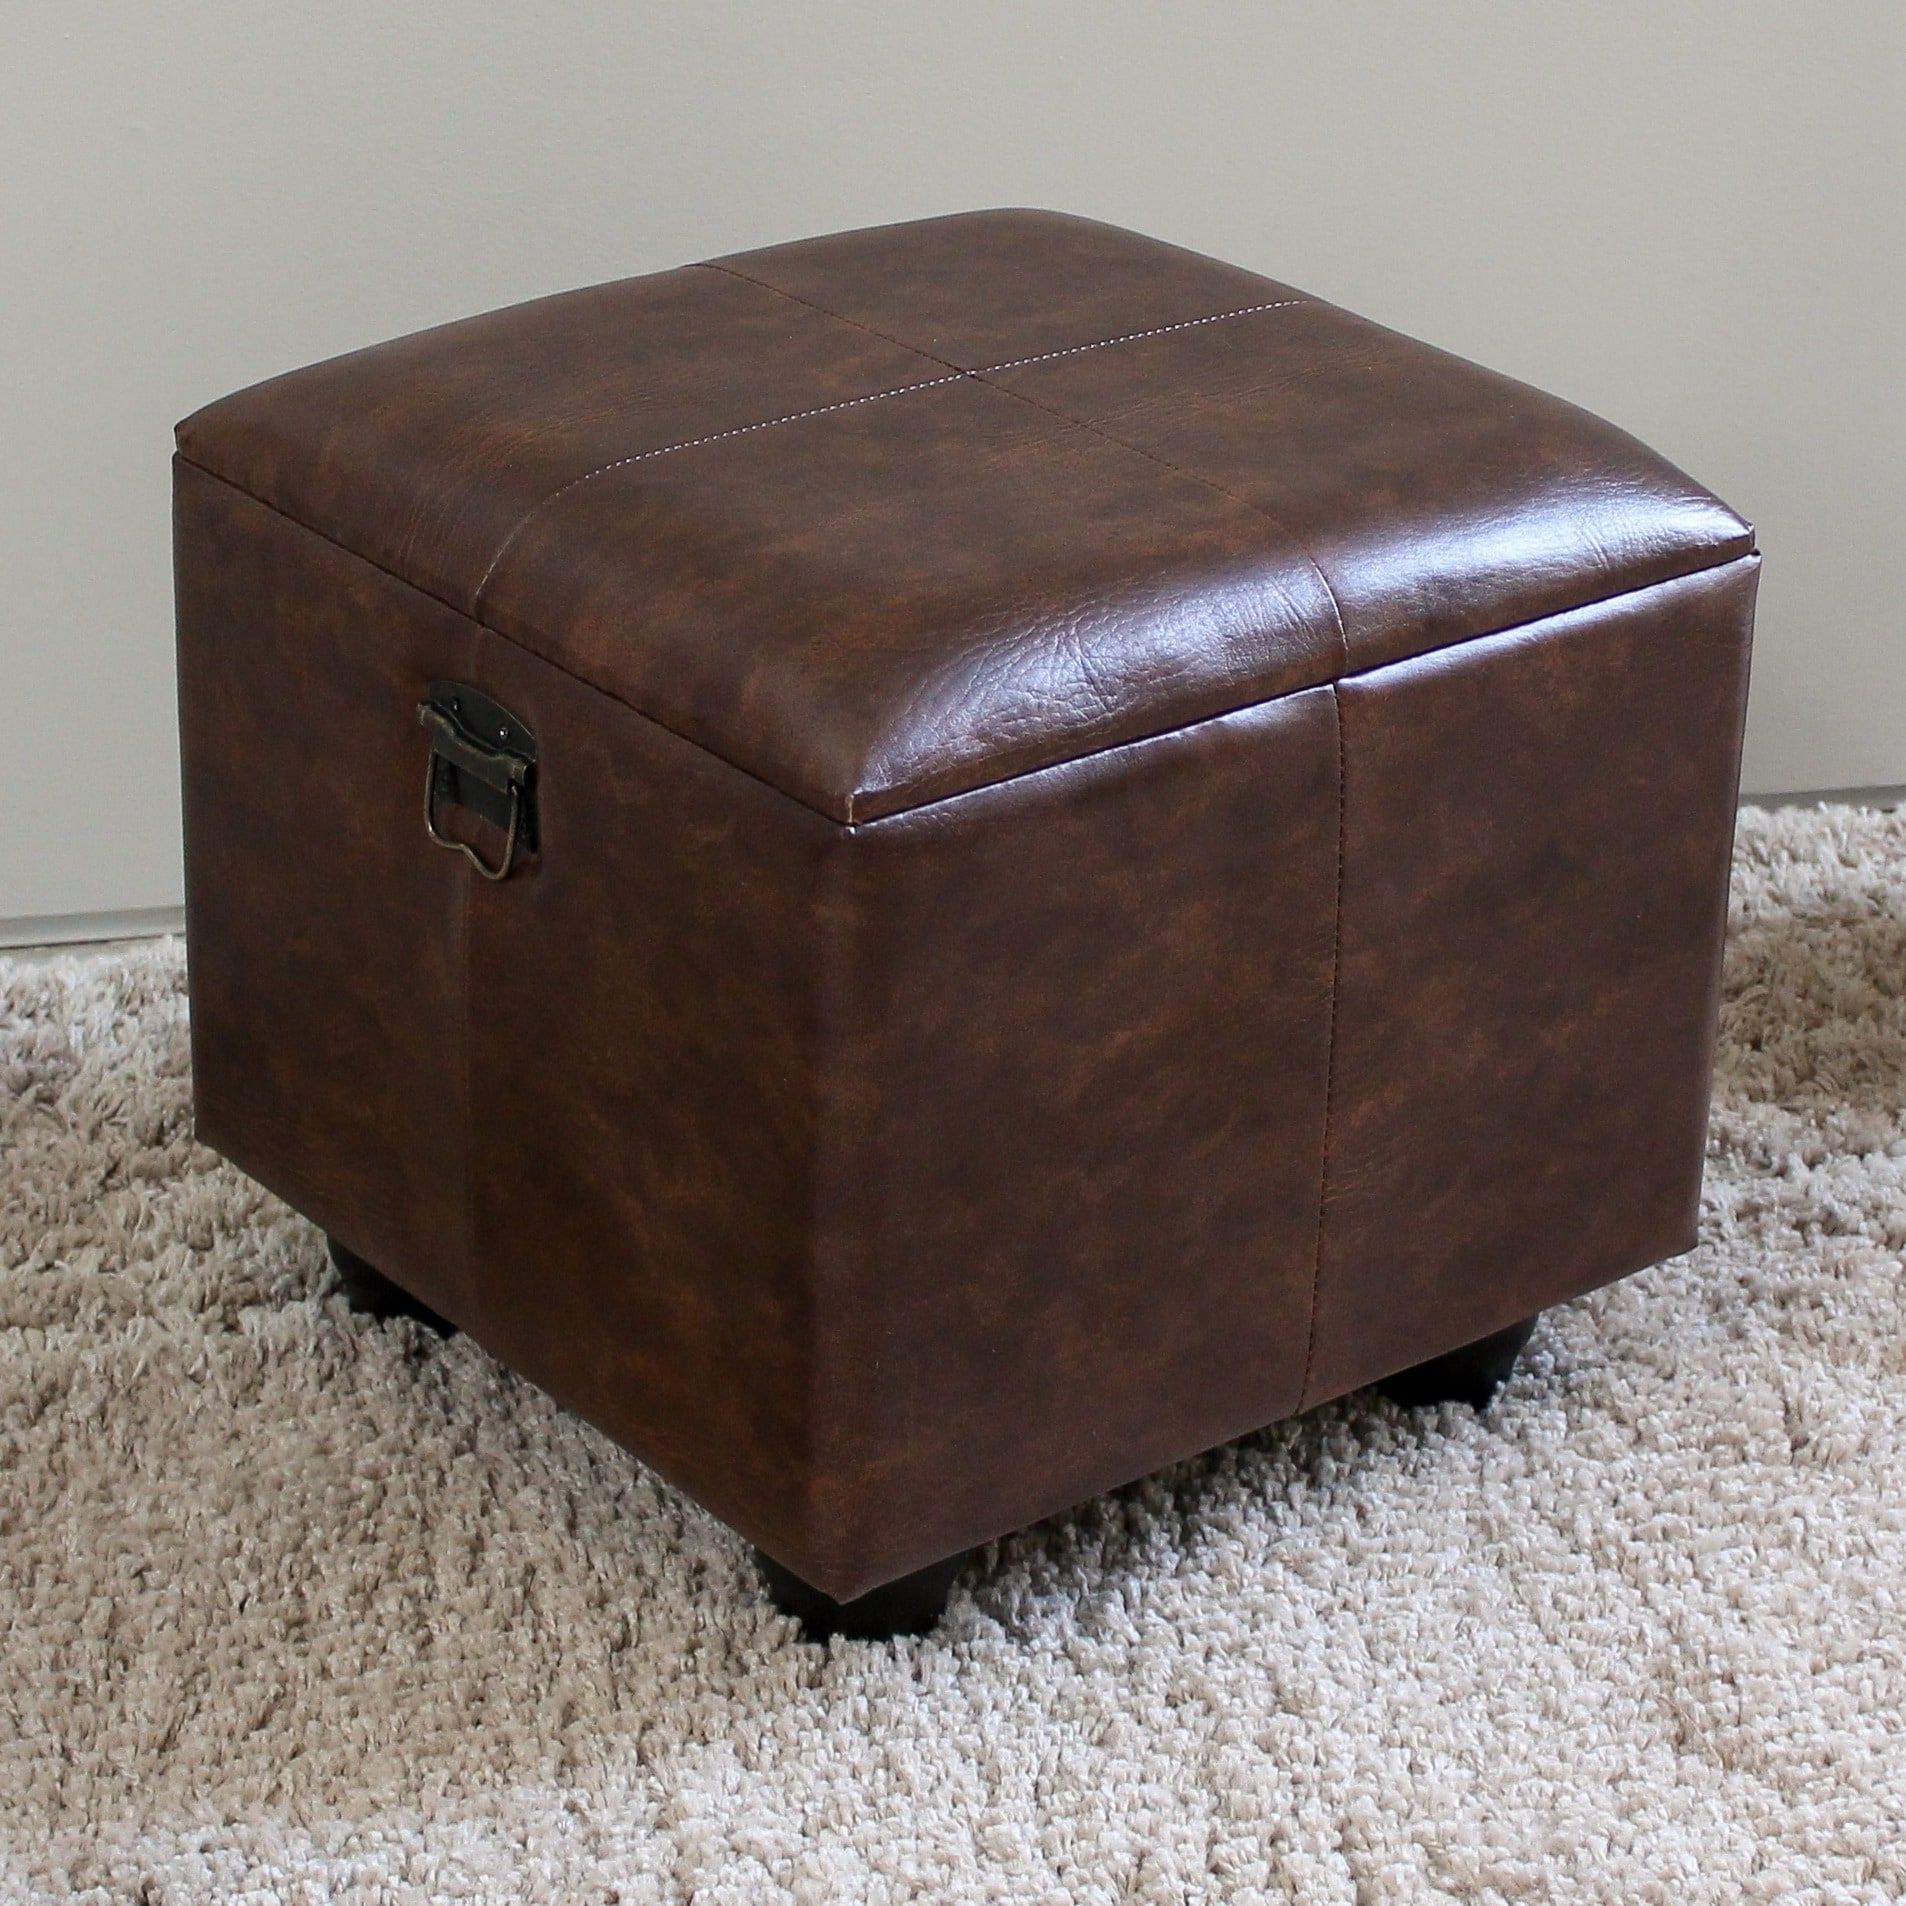 International Caravan Carmel Square Storage Ottoman | Ebay Within Gold Faux Leather Ottomans With Pull Tab (Gallery 19 of 20)